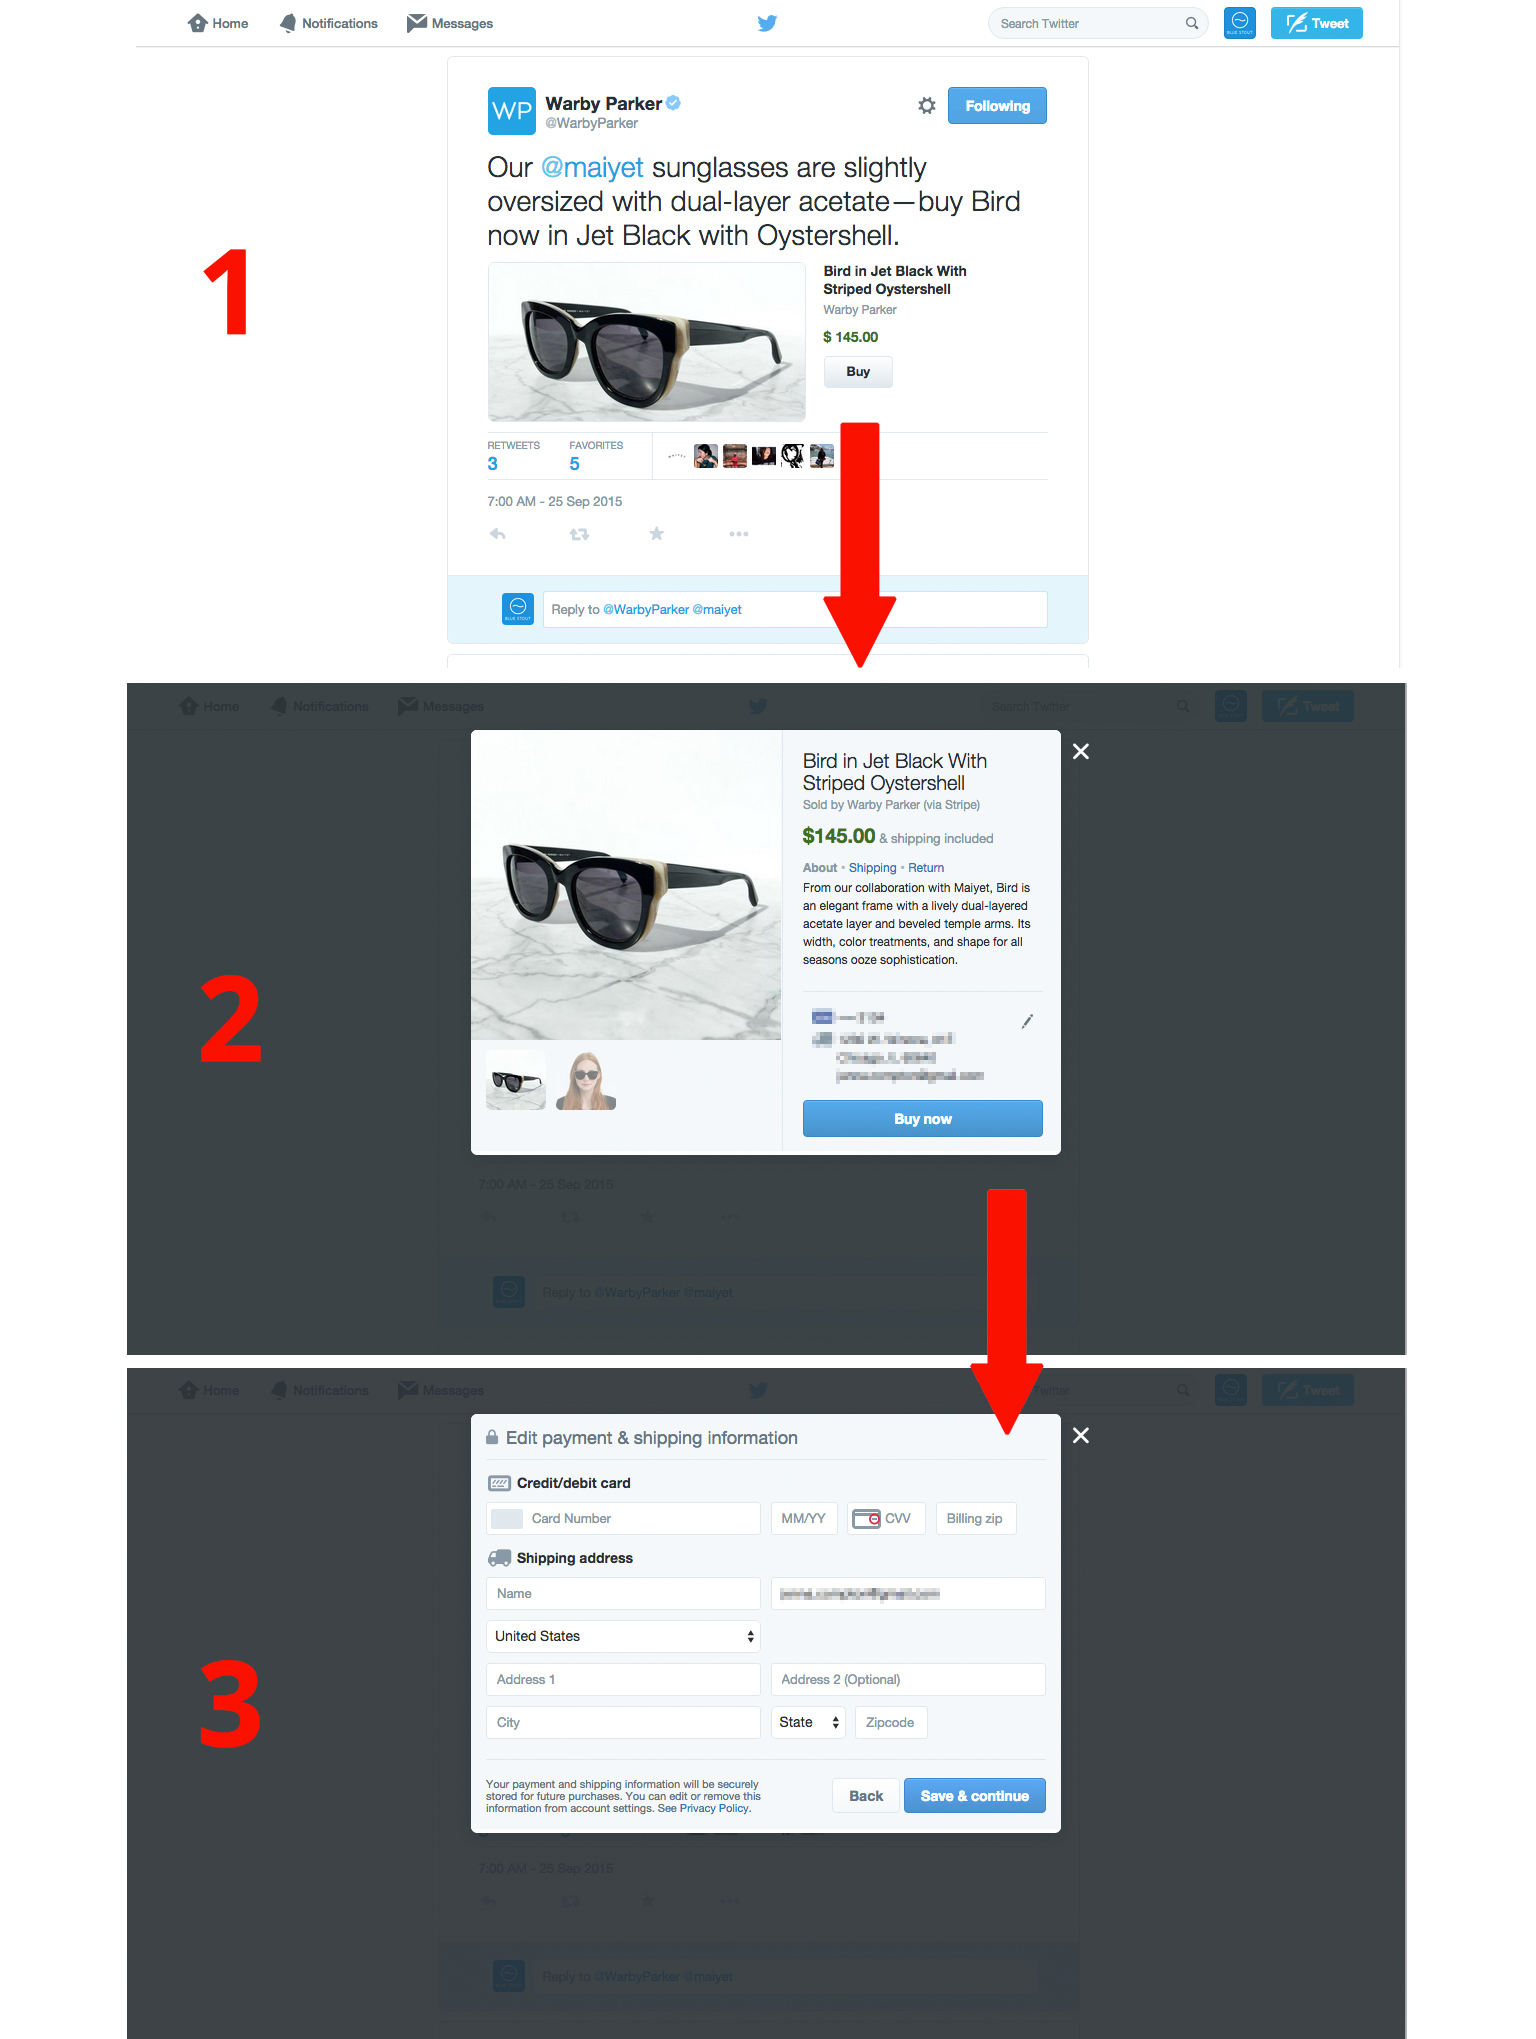 ecommerce sale by Warby Parker with Relay for social selling on Twitter 